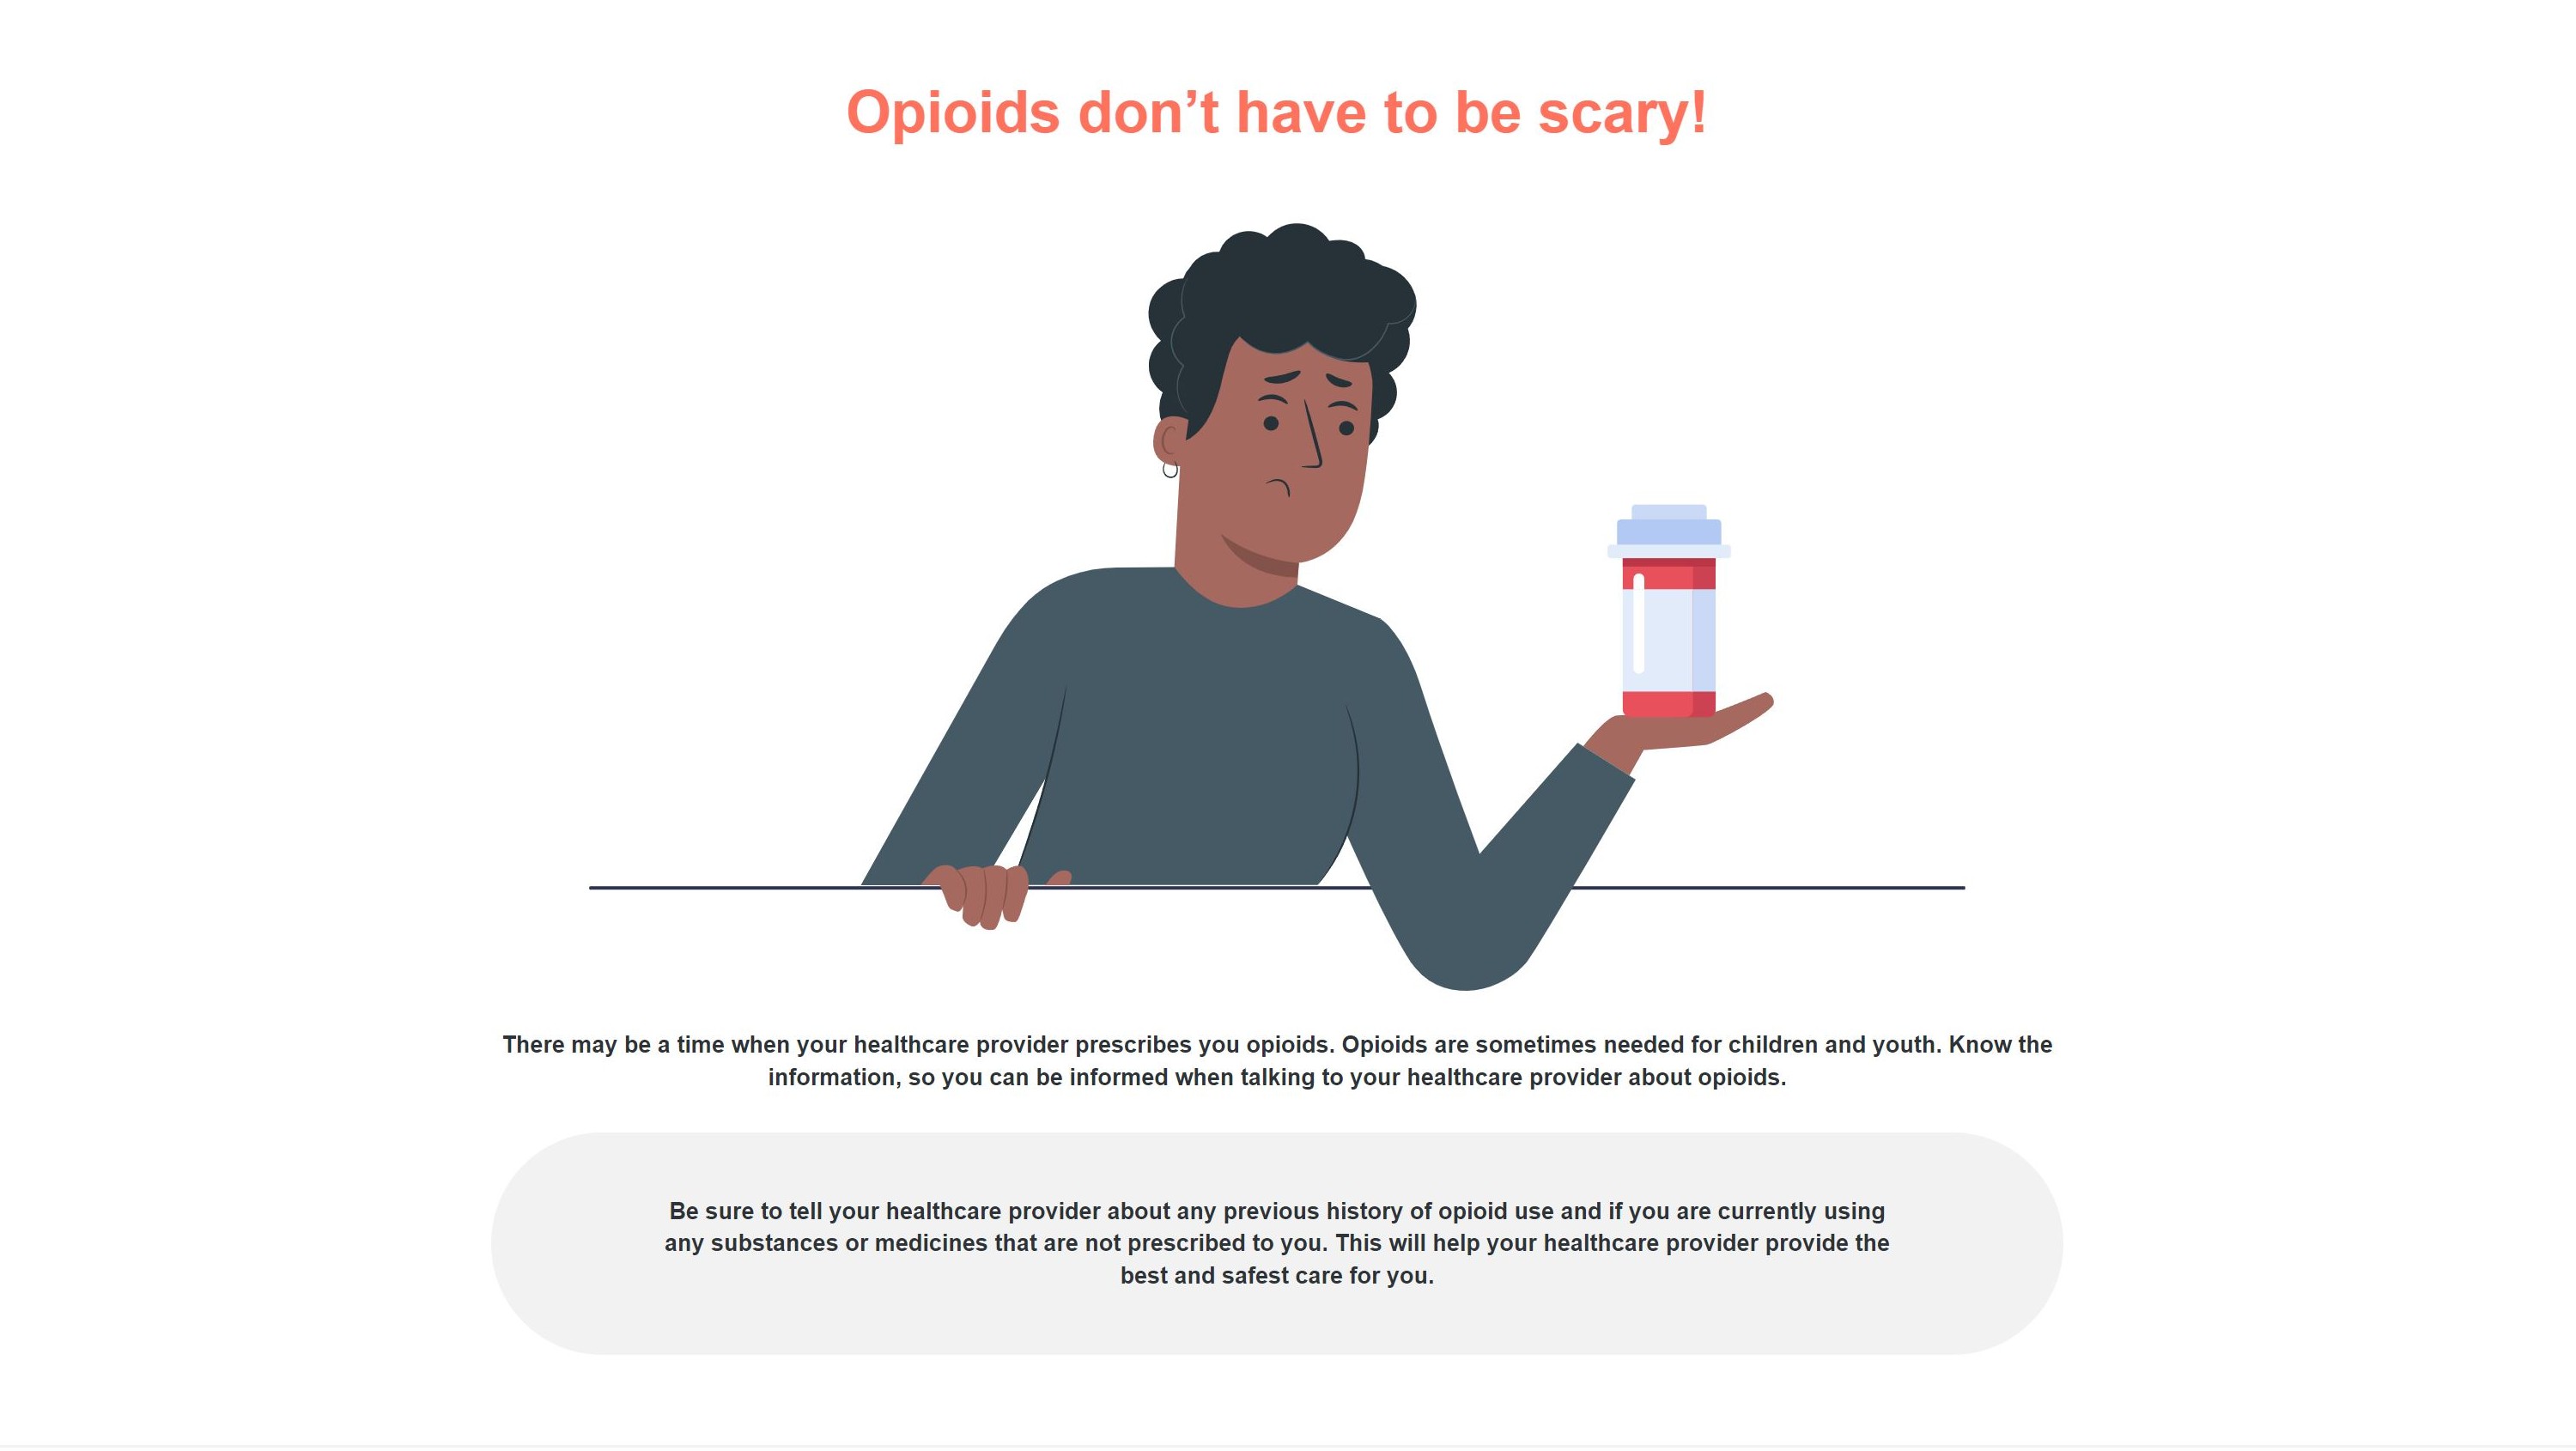 211202-dyson-opioids-review-infographic-youth-3000px.jpg